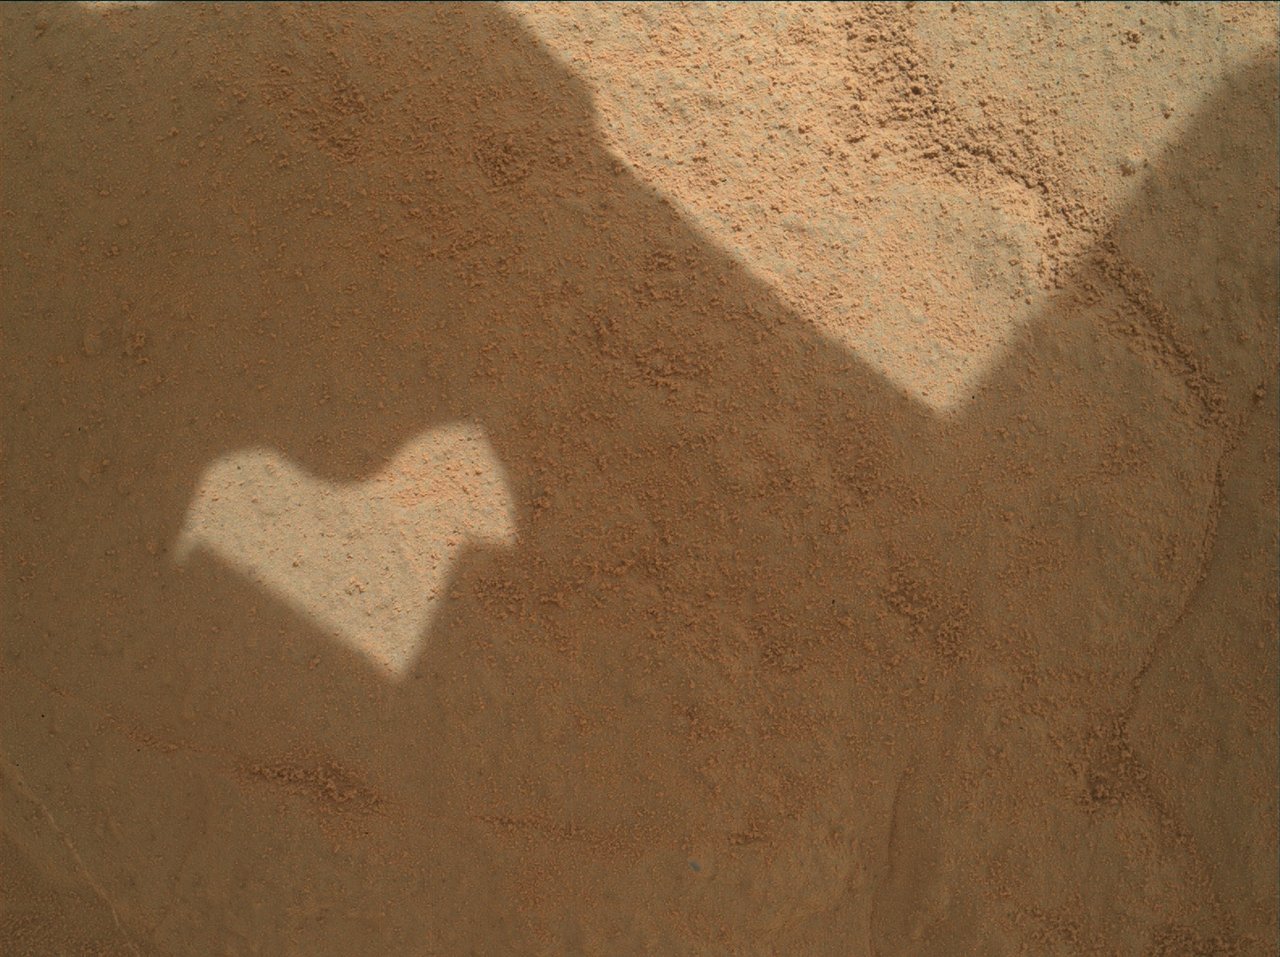 A cheerful patch of heart-shaped sunlight reminds us of how we love learning about Mars!